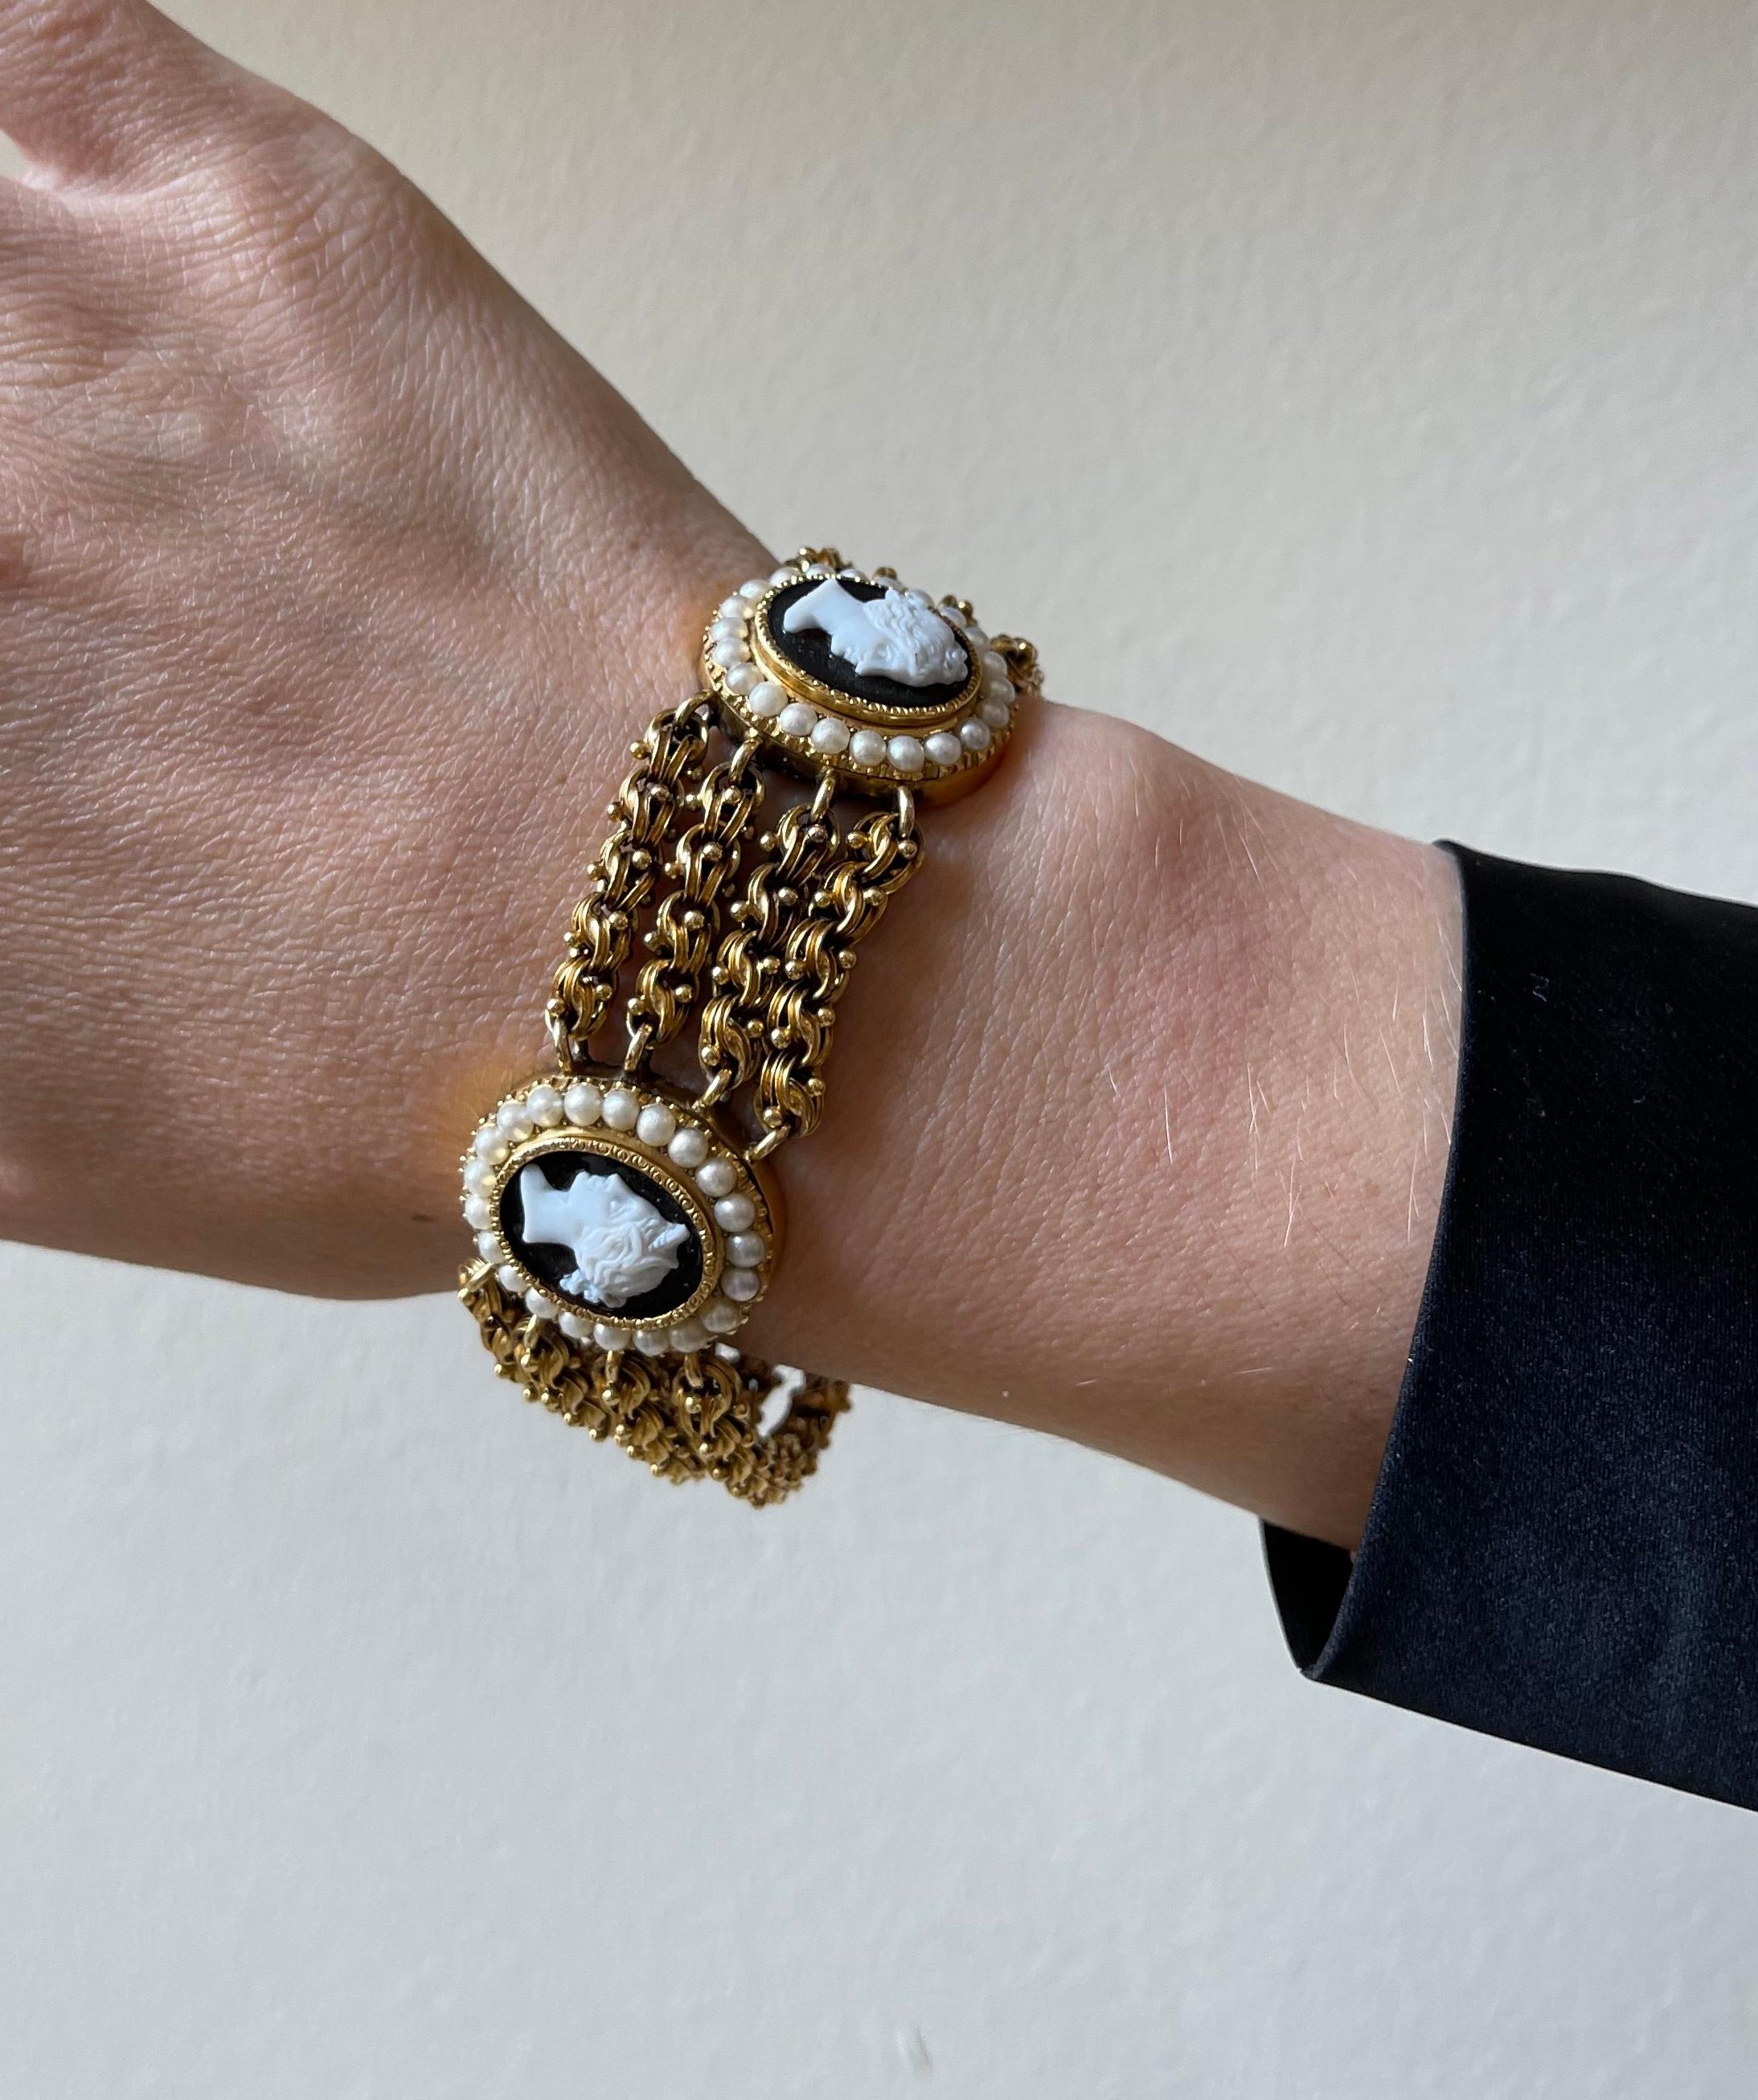 Antique Victorian 14k gold 4 row bracelet, featuring two hardstone cameo stations, depicting a lady's profile, surrounded with pearls. Bracelet is 7